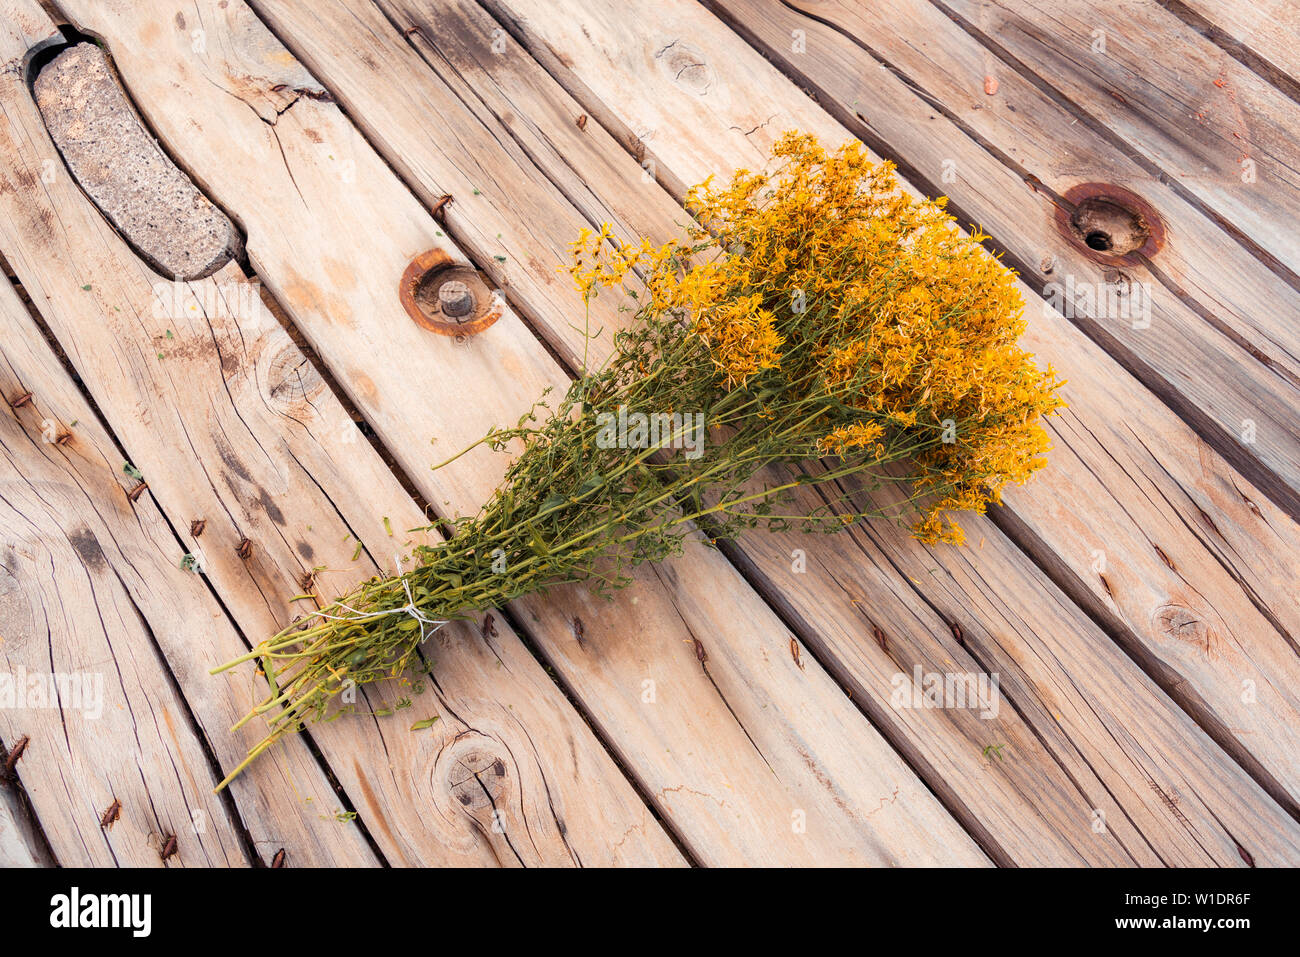 A dried bucket of St John's wort (Perforatum hypericum) with yellow flowers and green stems laid on a old rustic cable drum venverted into a table. Stock Photo